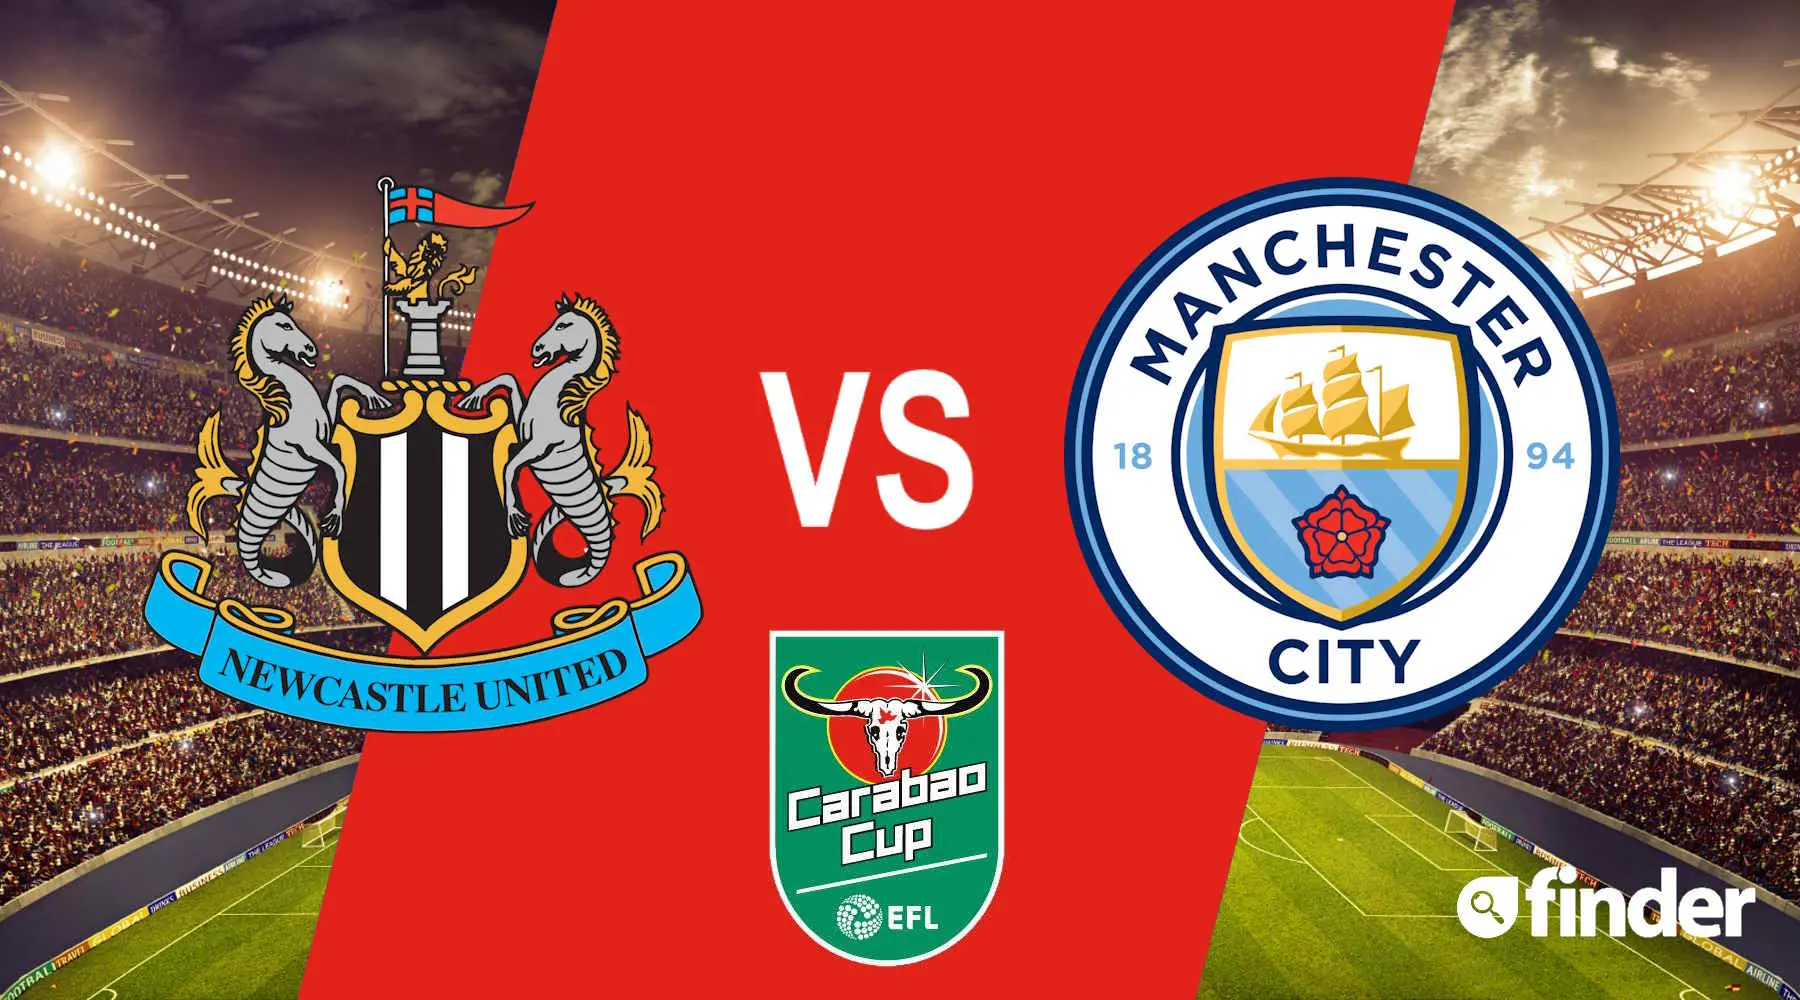 How to watch Newcastle vs Man City Carabao Cup live and free